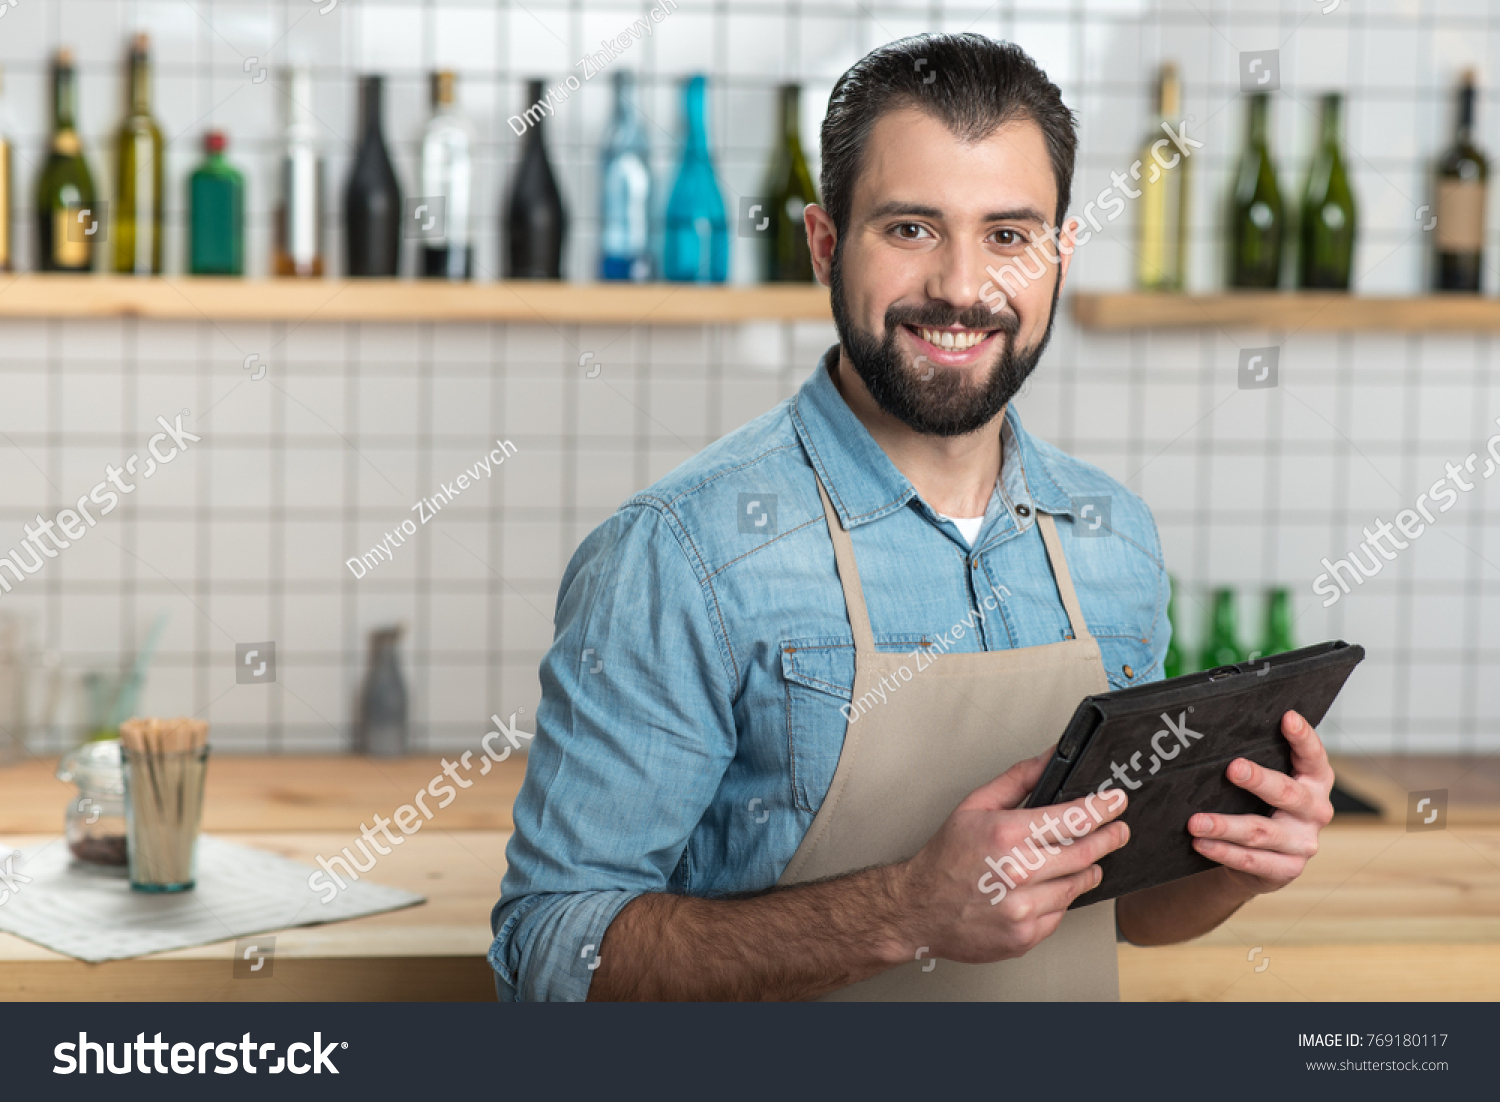 Convenient gadget. Positive emotional bearded waiter looking glad while standing with a modern convenient tablet in his hands and smiling #769180117